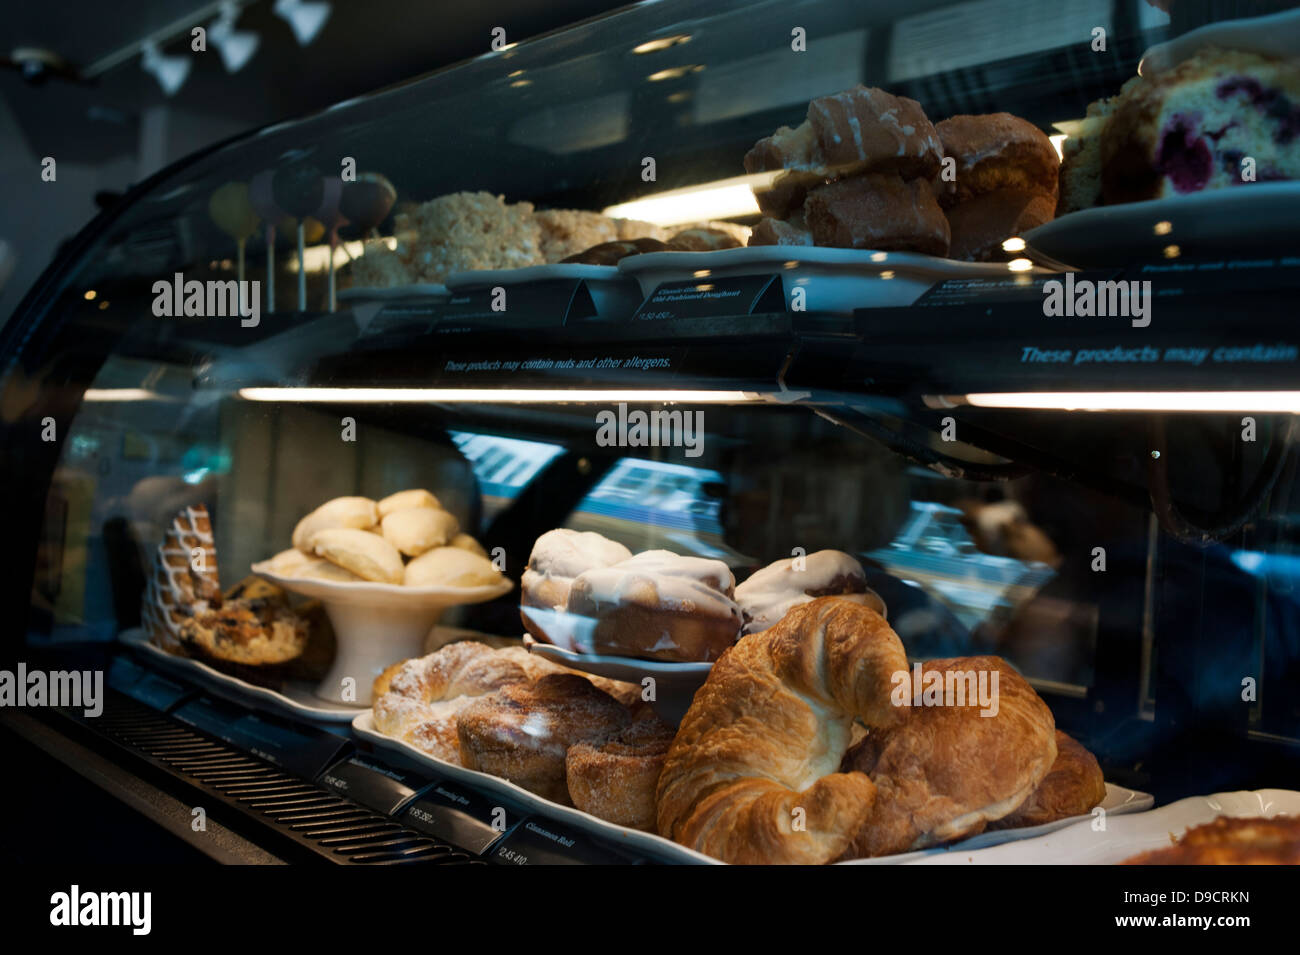 https://c8.alamy.com/comp/D9CRKN/pastries-on-display-inside-of-a-glass-deli-counter-D9CRKN.jpg